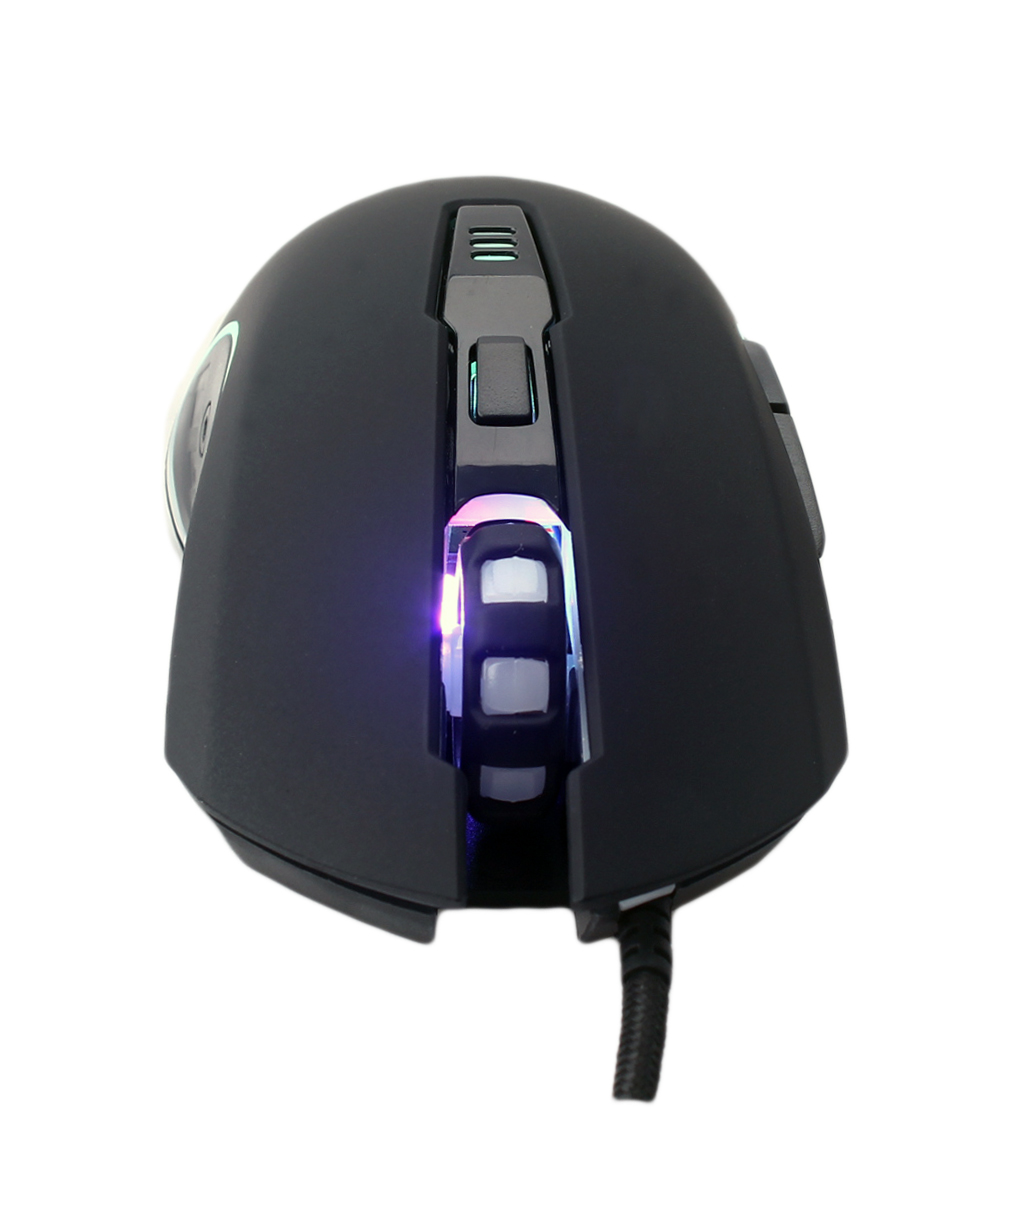 6D Gaming Mouse with Rubber Oil,800/1200/1600/2400 DPI,